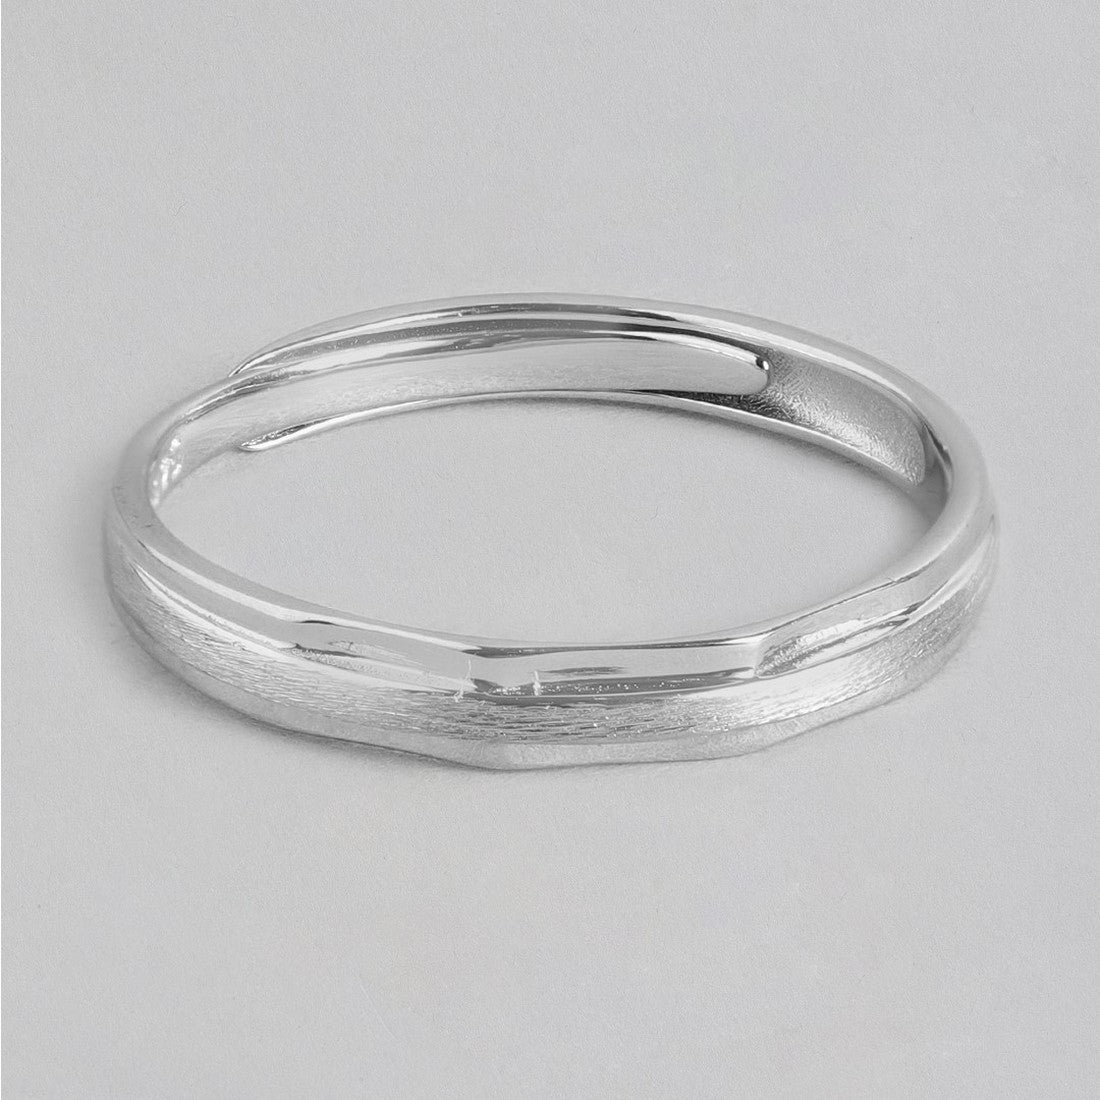 Rhodium Plated Minimalistic 925 Sterling Silver Band Ring (Adjustable) For Him